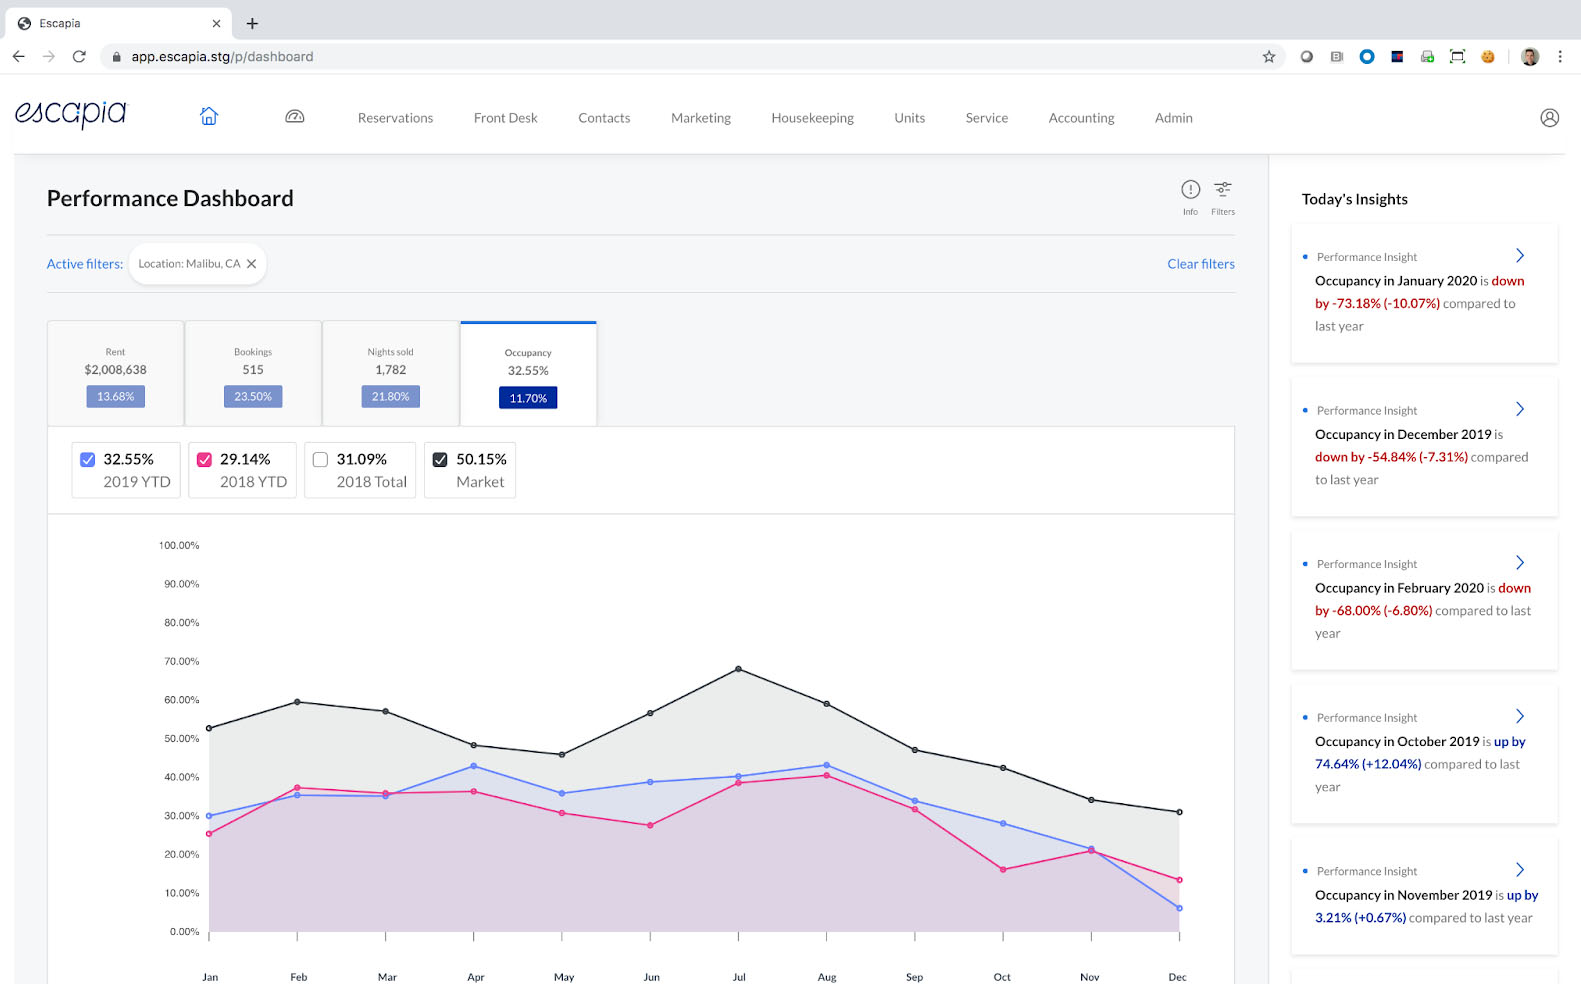 Image of Escapia's performance dashboard that shows a graph and a sidebar with today's insights.